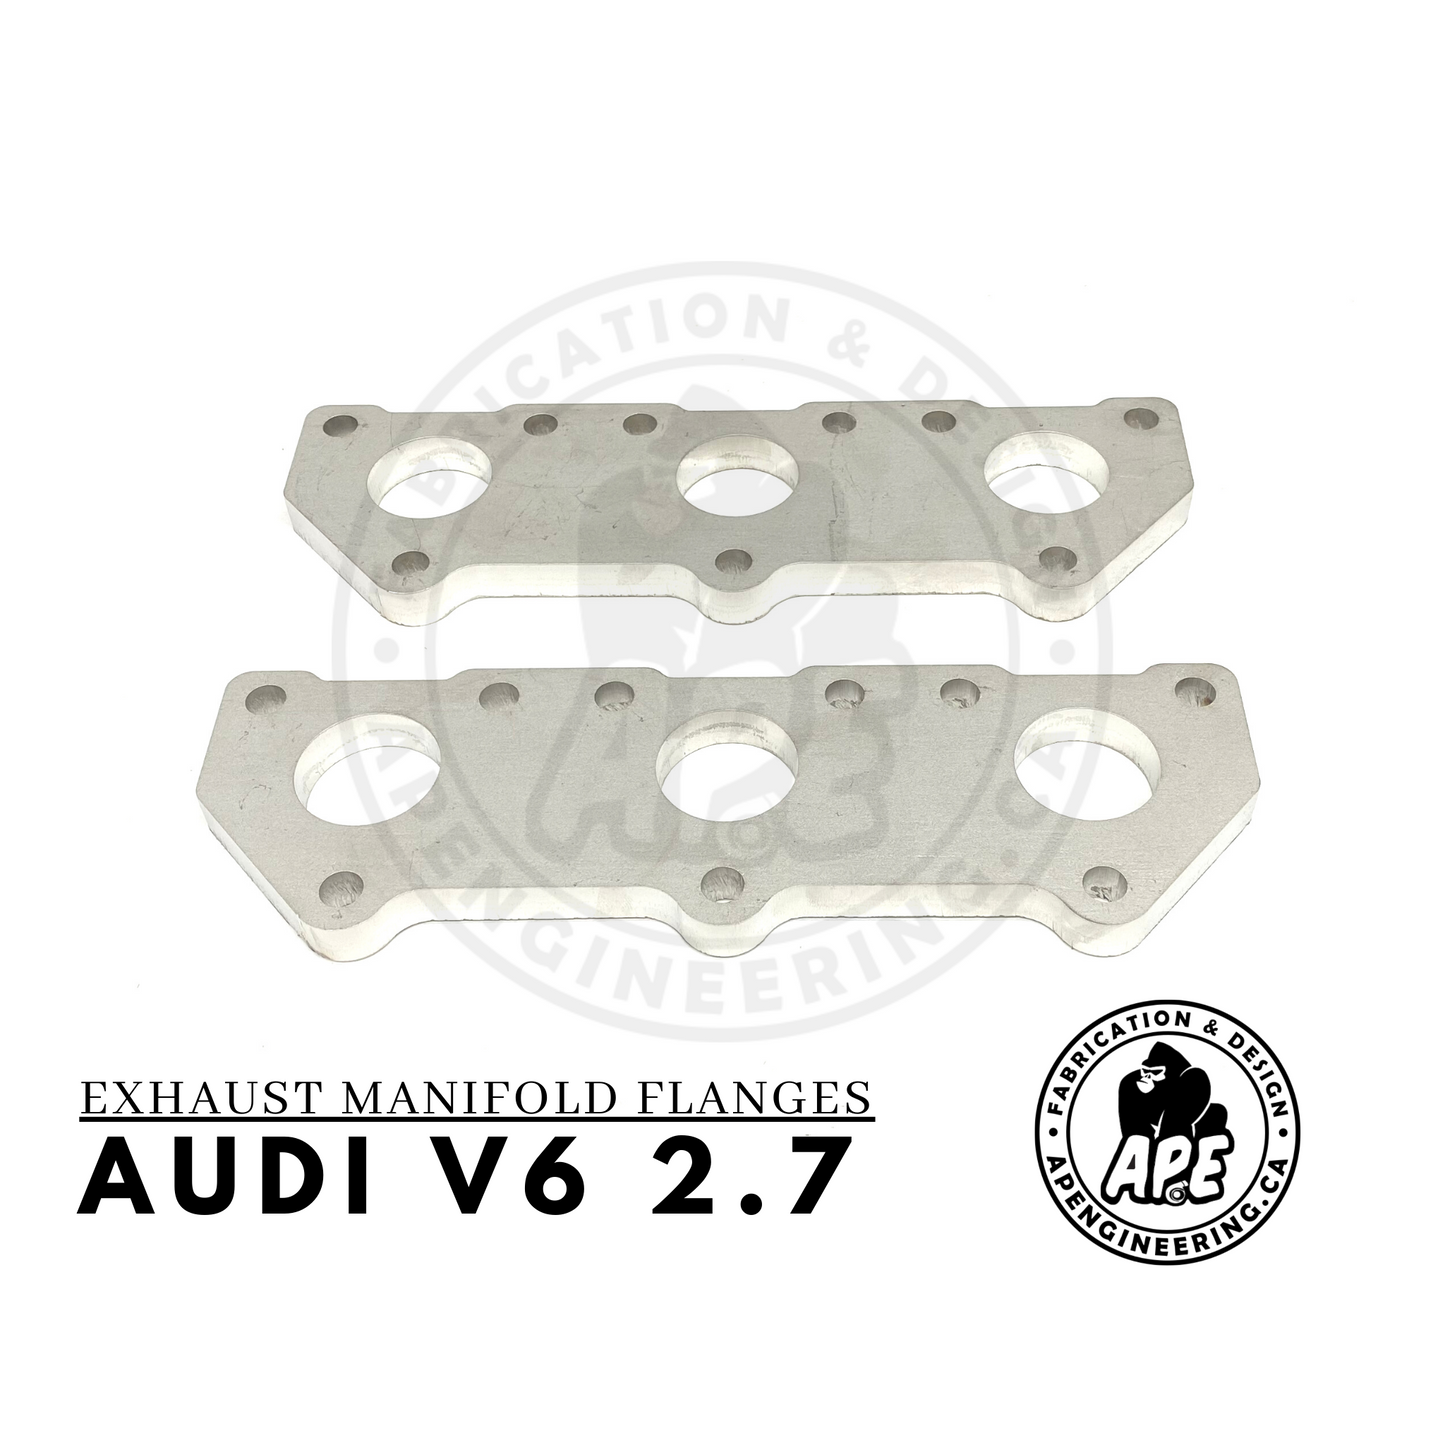 AUDI 2.7 V6 (B5 S4/ALLROAD/A6) EXHAUST MANIFOLD FLANGE - 1/2 STAINLESS STEEL